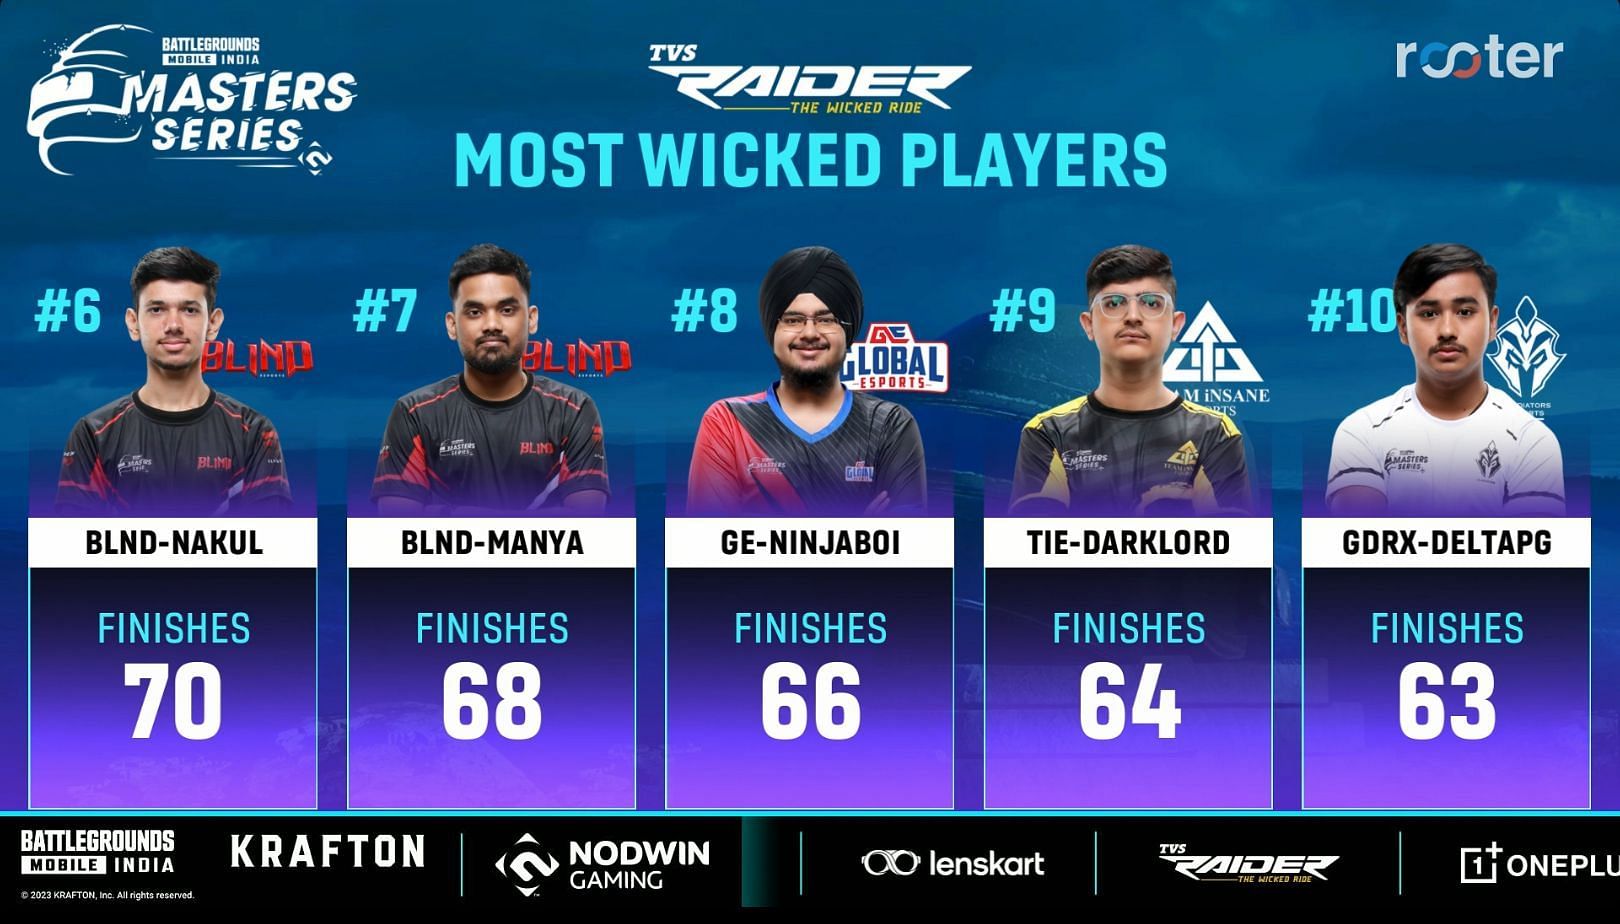 6th to 10th ranked players of Masters Series (Image via Rooter)